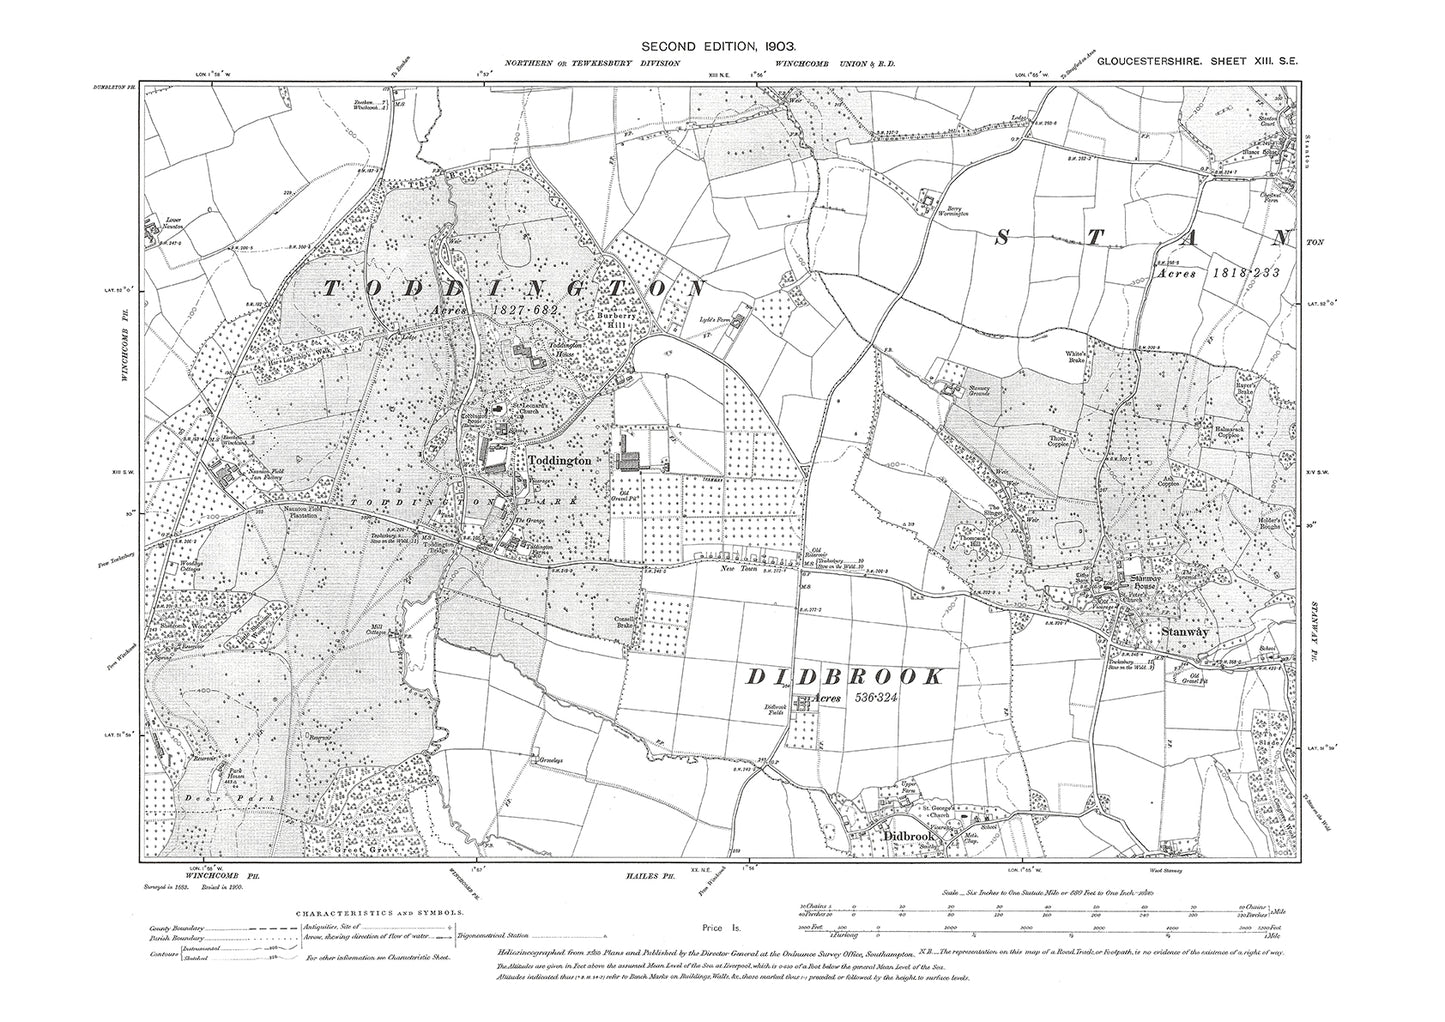 Old OS map dated 1903, showing Toddington, Stanway, Stanton (west) in Gloucestershire - 13SE